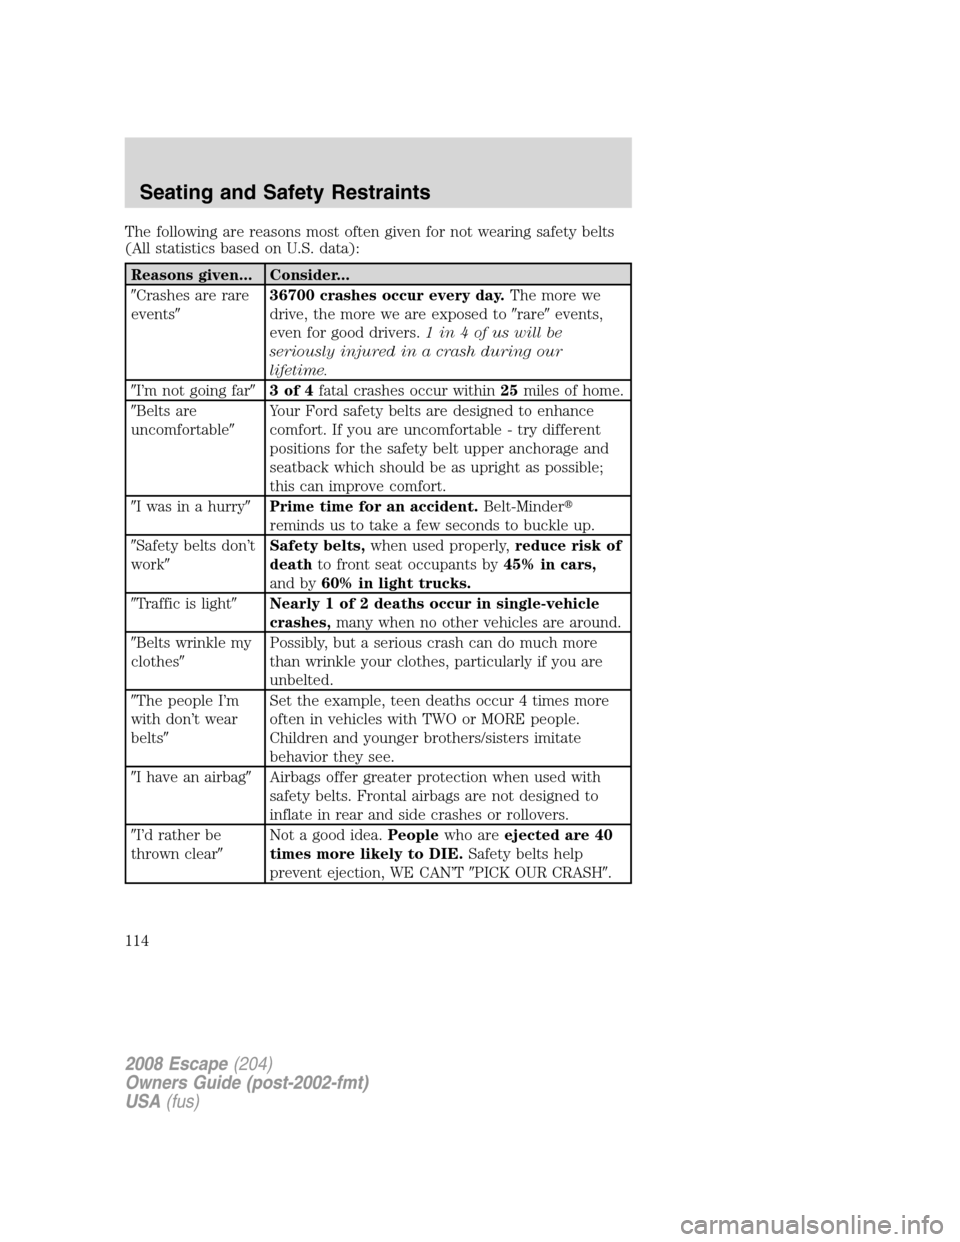 FORD ESCAPE 2008 2.G Owners Manual The following are reasons most often given for not wearing safety belts
(All statistics based on U.S. data):
Reasons given... Consider...
Crashes are rare
events36700 crashes occur every day.The mor